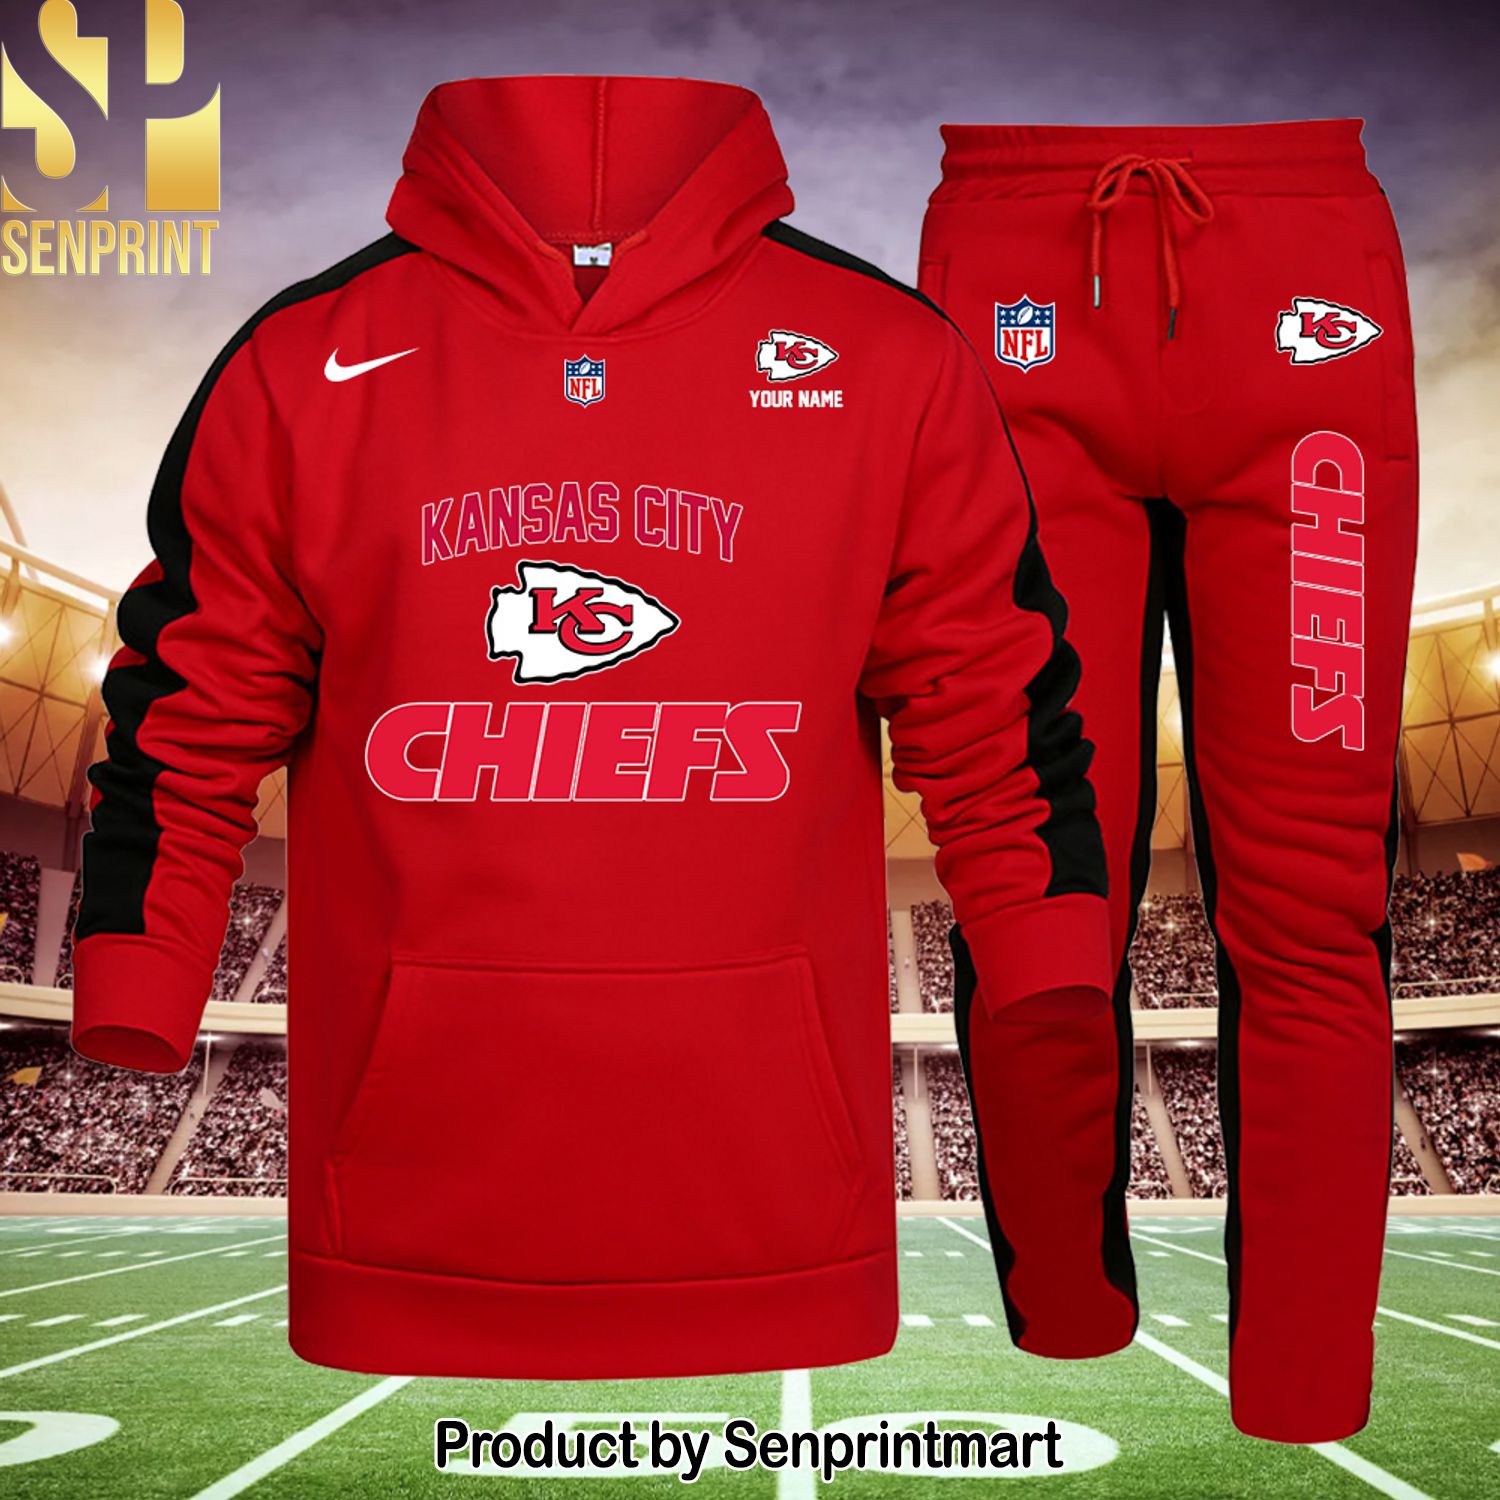 Kansas City Chiefs Hot Outfit All Over Print Shirt and Pants